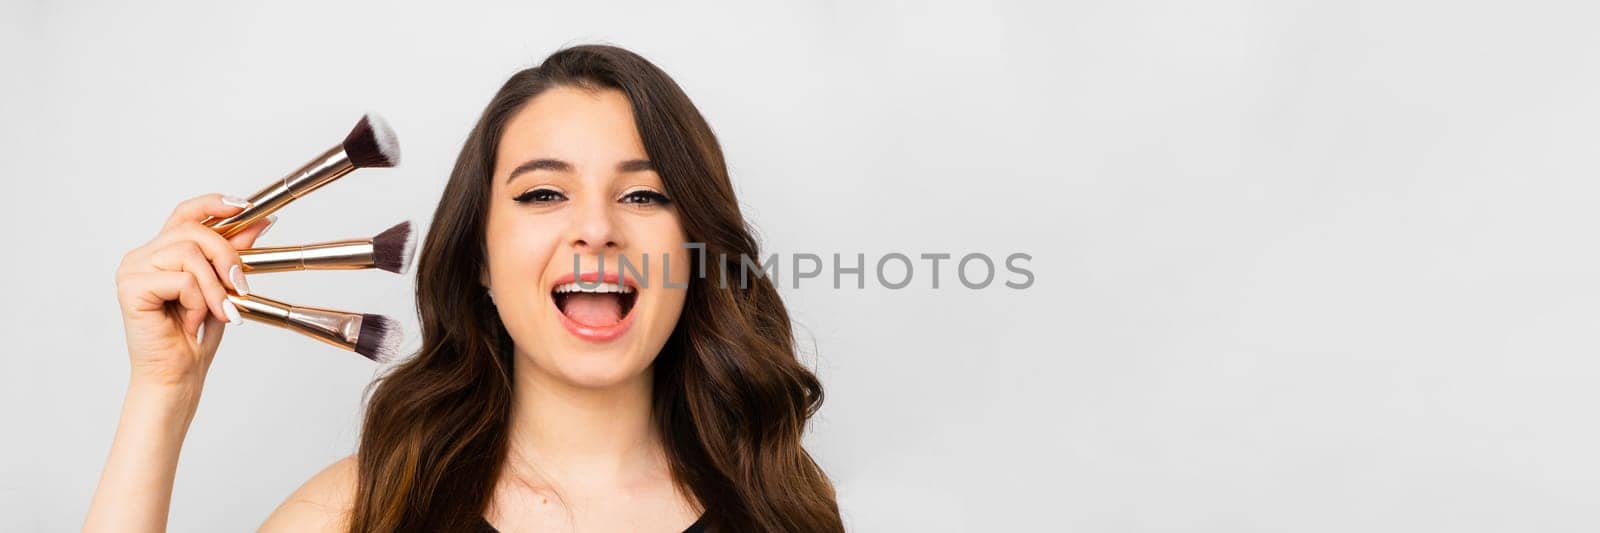 Young woman holding a set of makeup brushes with a surprised facial expression by vladimka